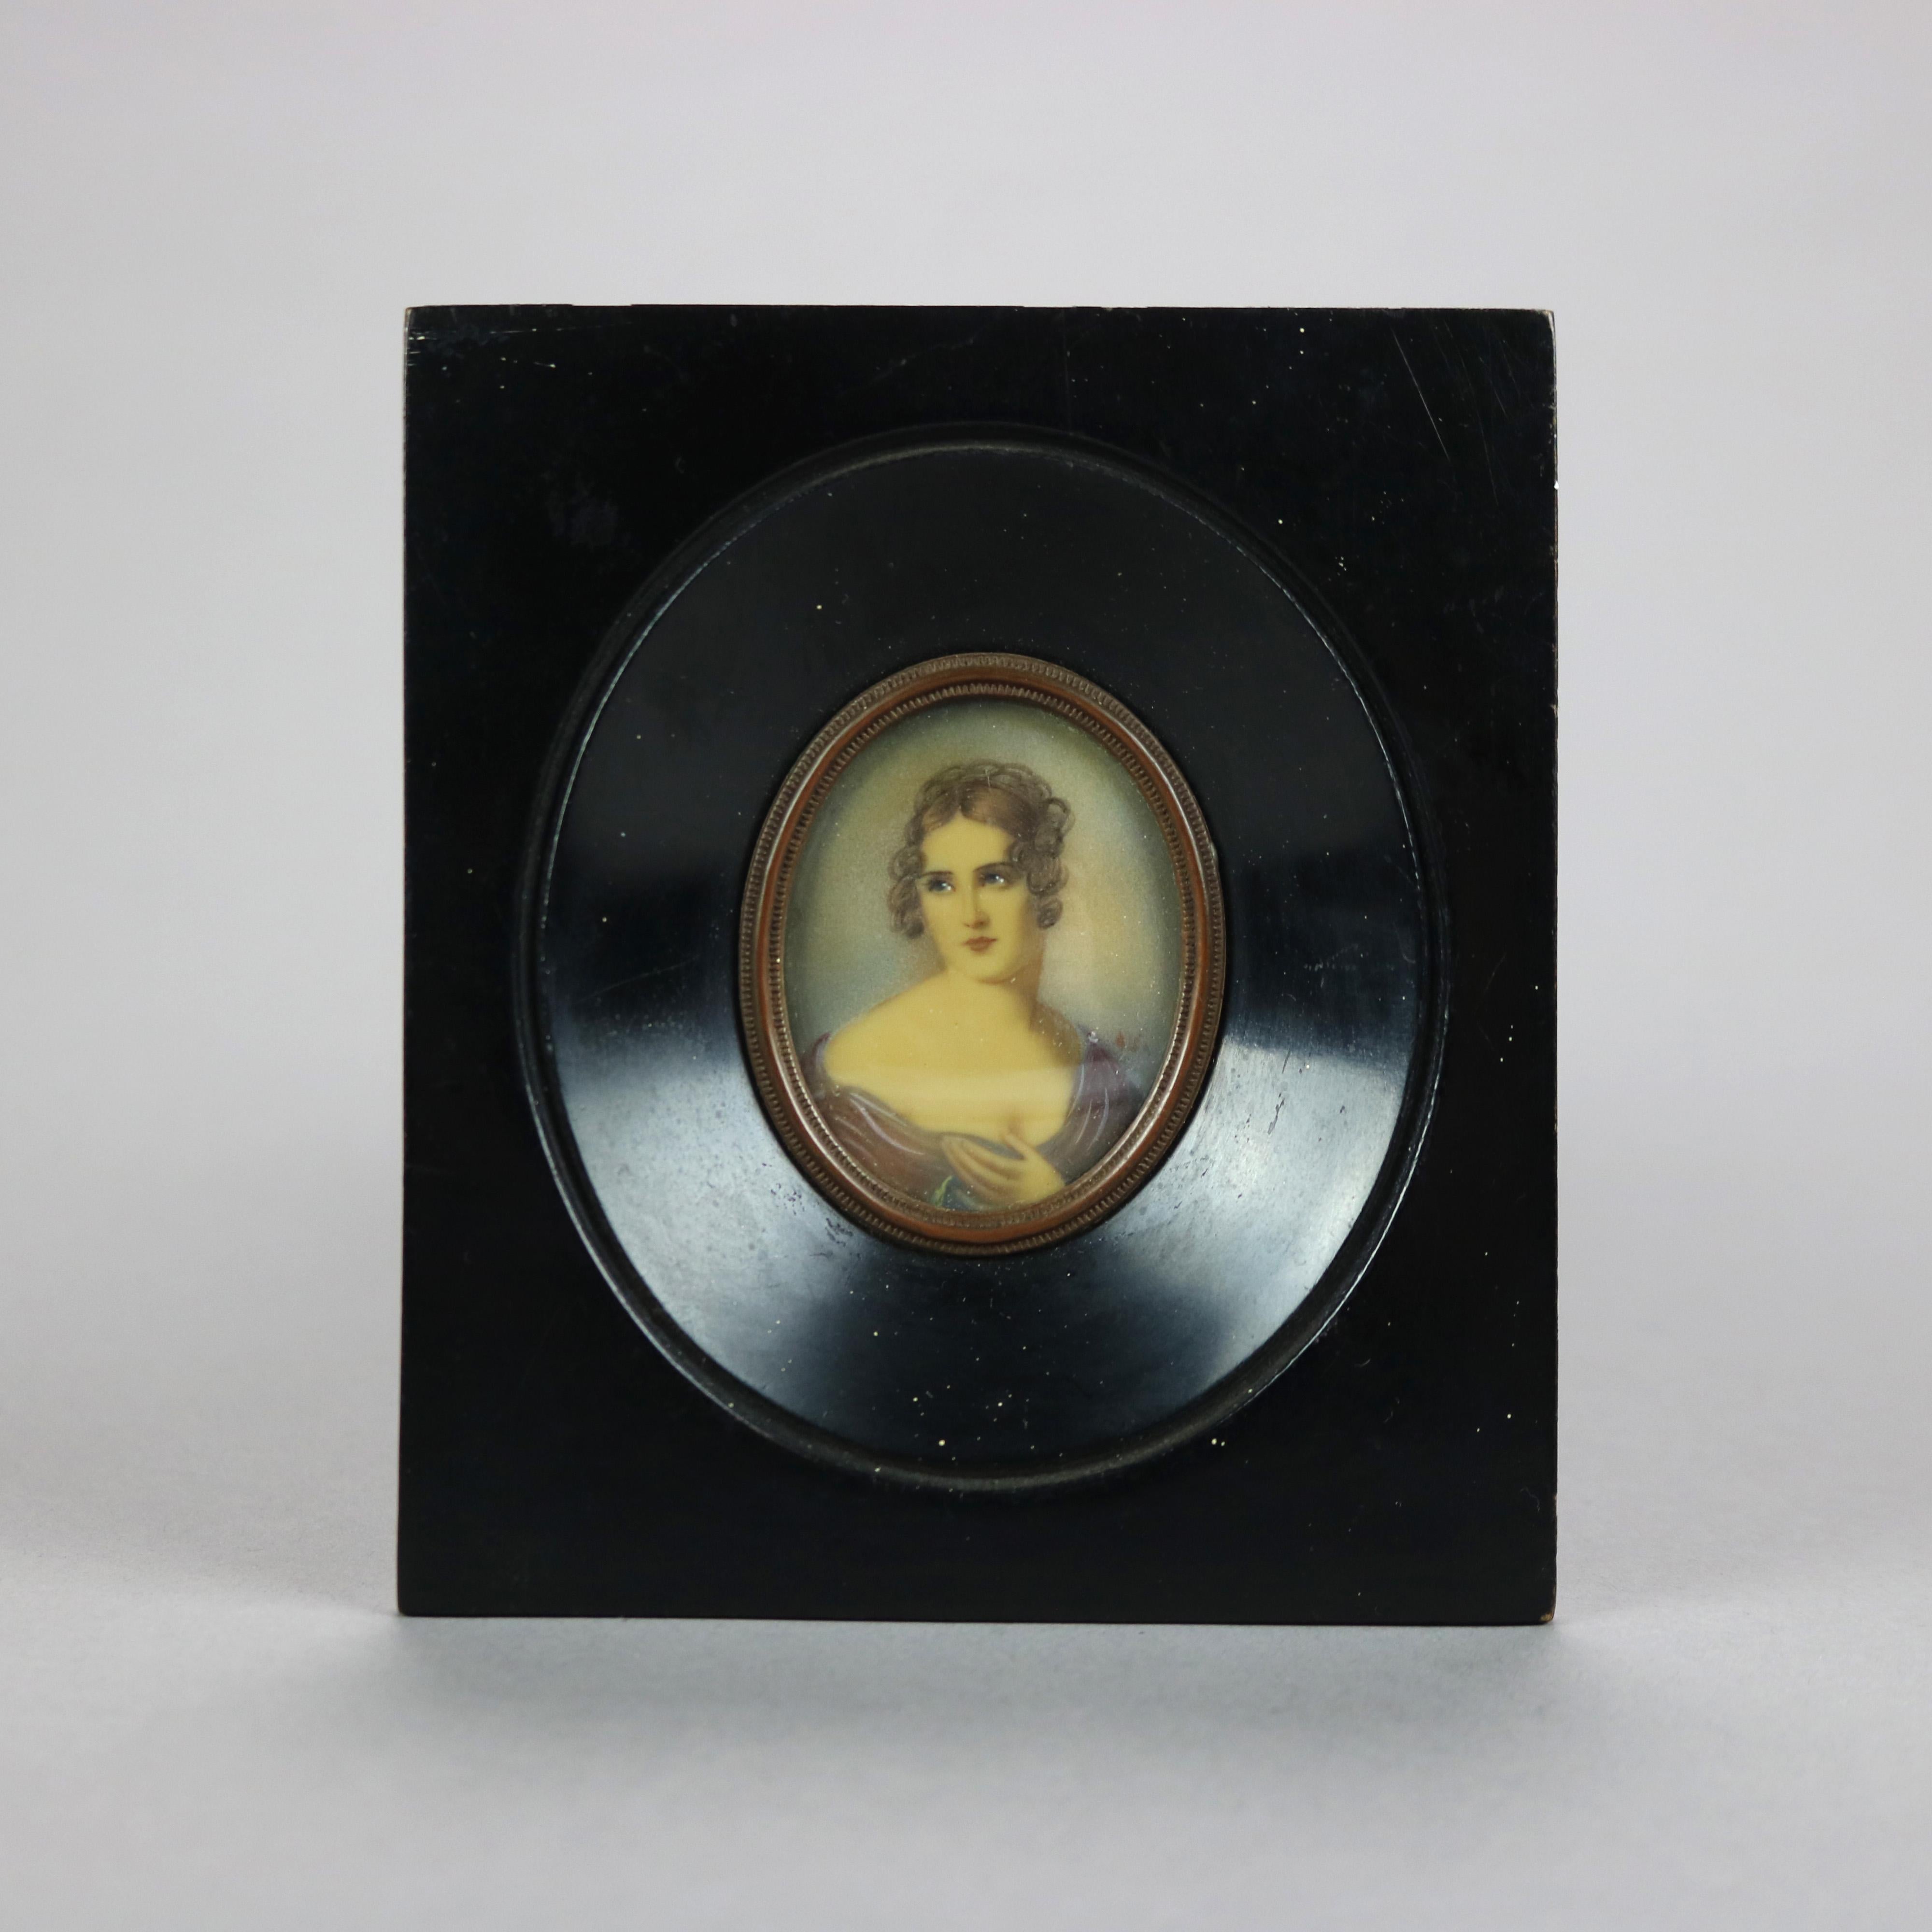 An antique miniature portrait painting on celluloid of Marie Antoinette seated in parcel gilt frame, artist signed Alex lower right, late 19th century

Measures - 4.75''H x 4''W x .75''D

Catalogue Note: Ask about DISCOUNTED DELIVERY RATES available